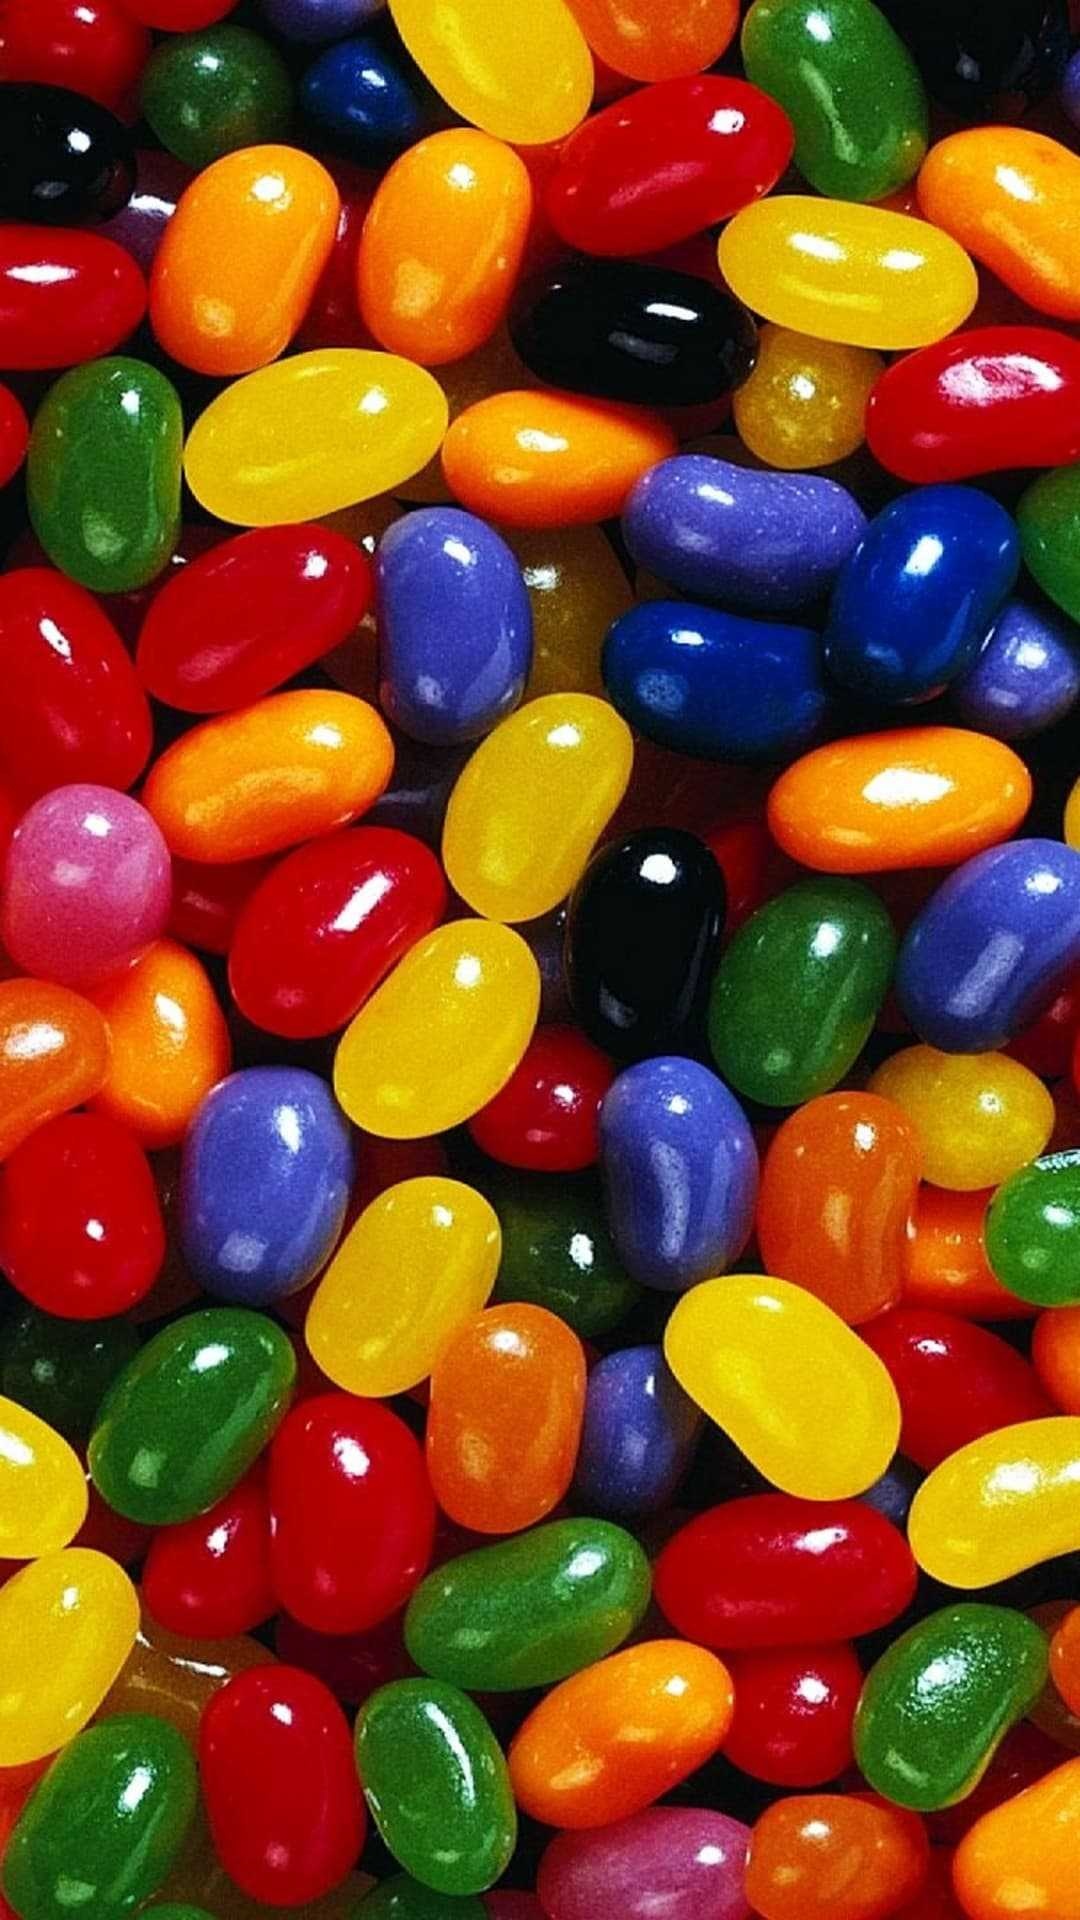 Colorful candy wallpaper, Sweet and vibrant, Eye-catching designs, Sugary pleasure, 1080x1920 Full HD Handy